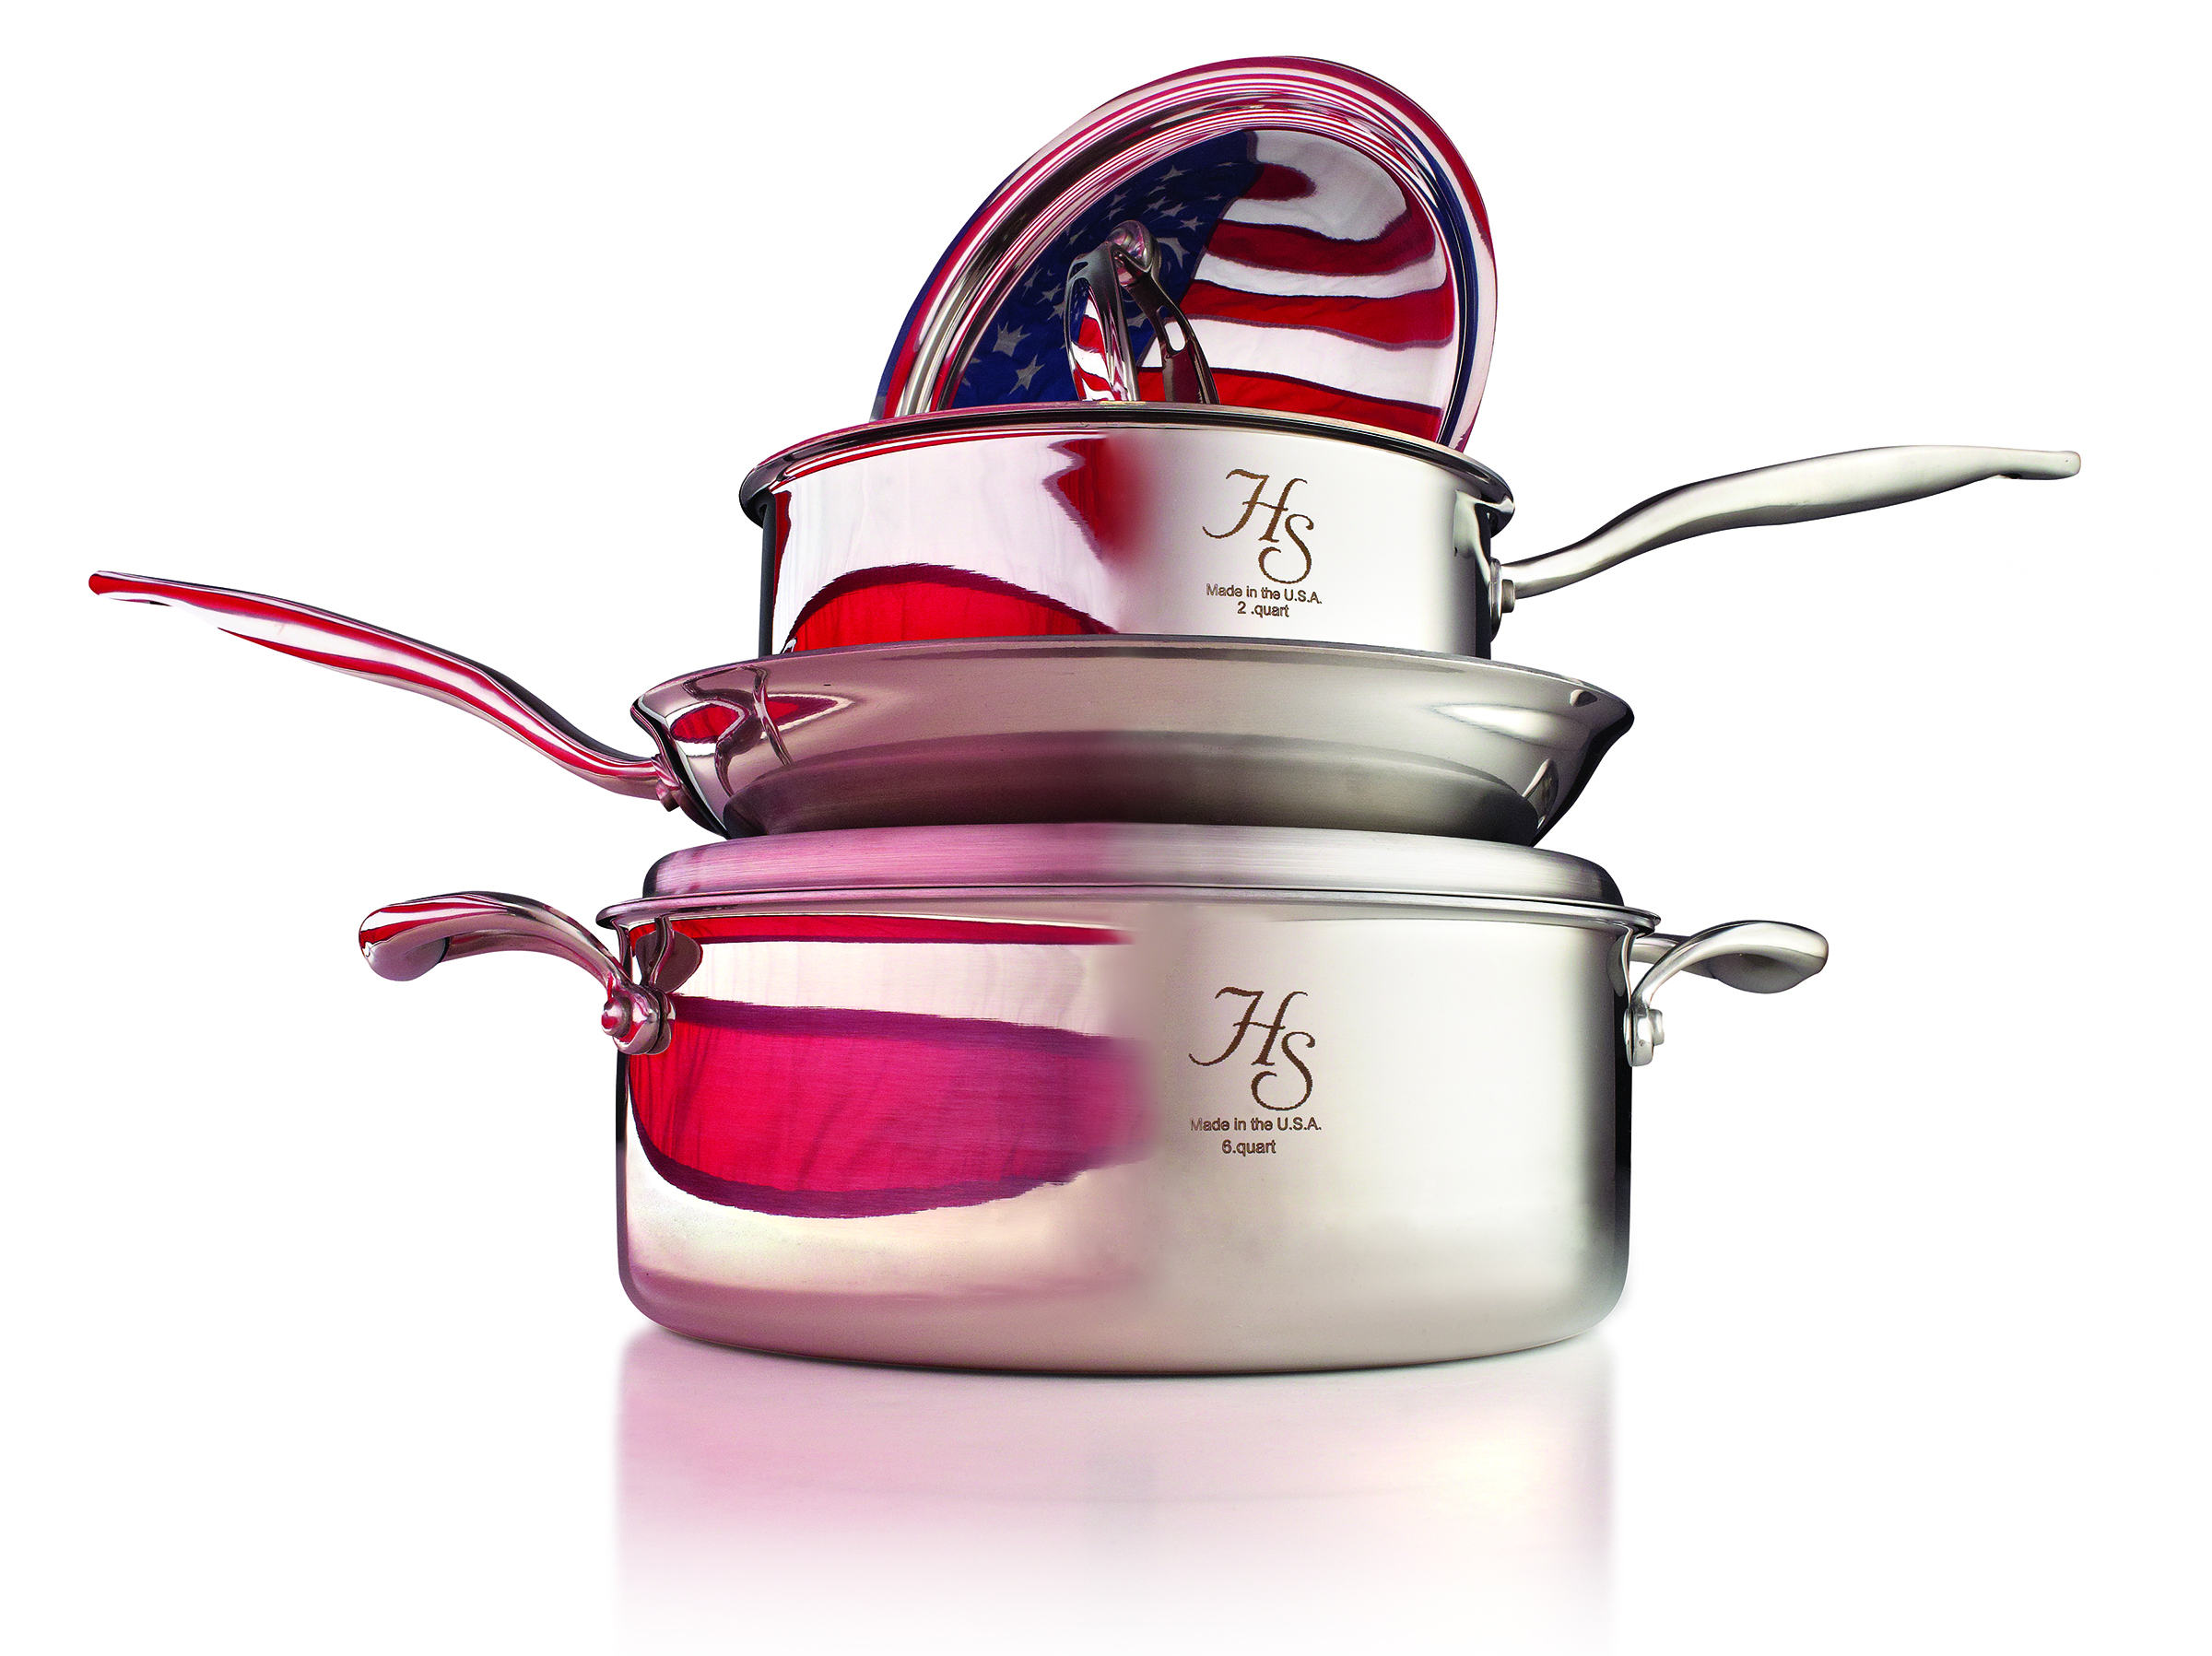 Hammer Stahl Cookware: Stainless Steel Made in the USA